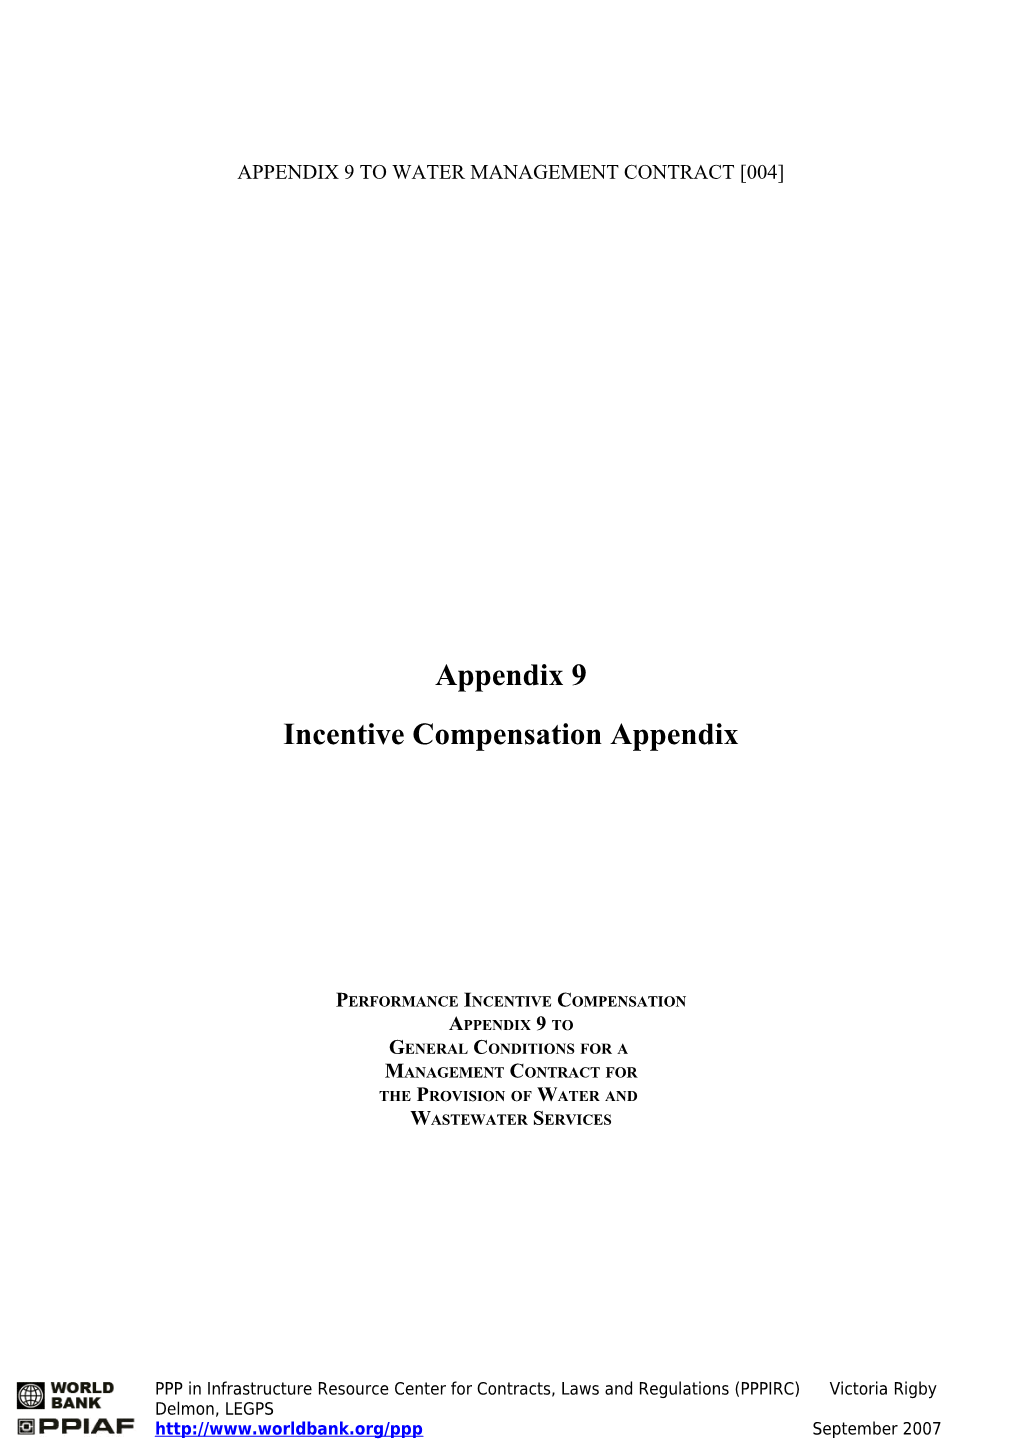 Appendix 9 to Water Management Contract 004